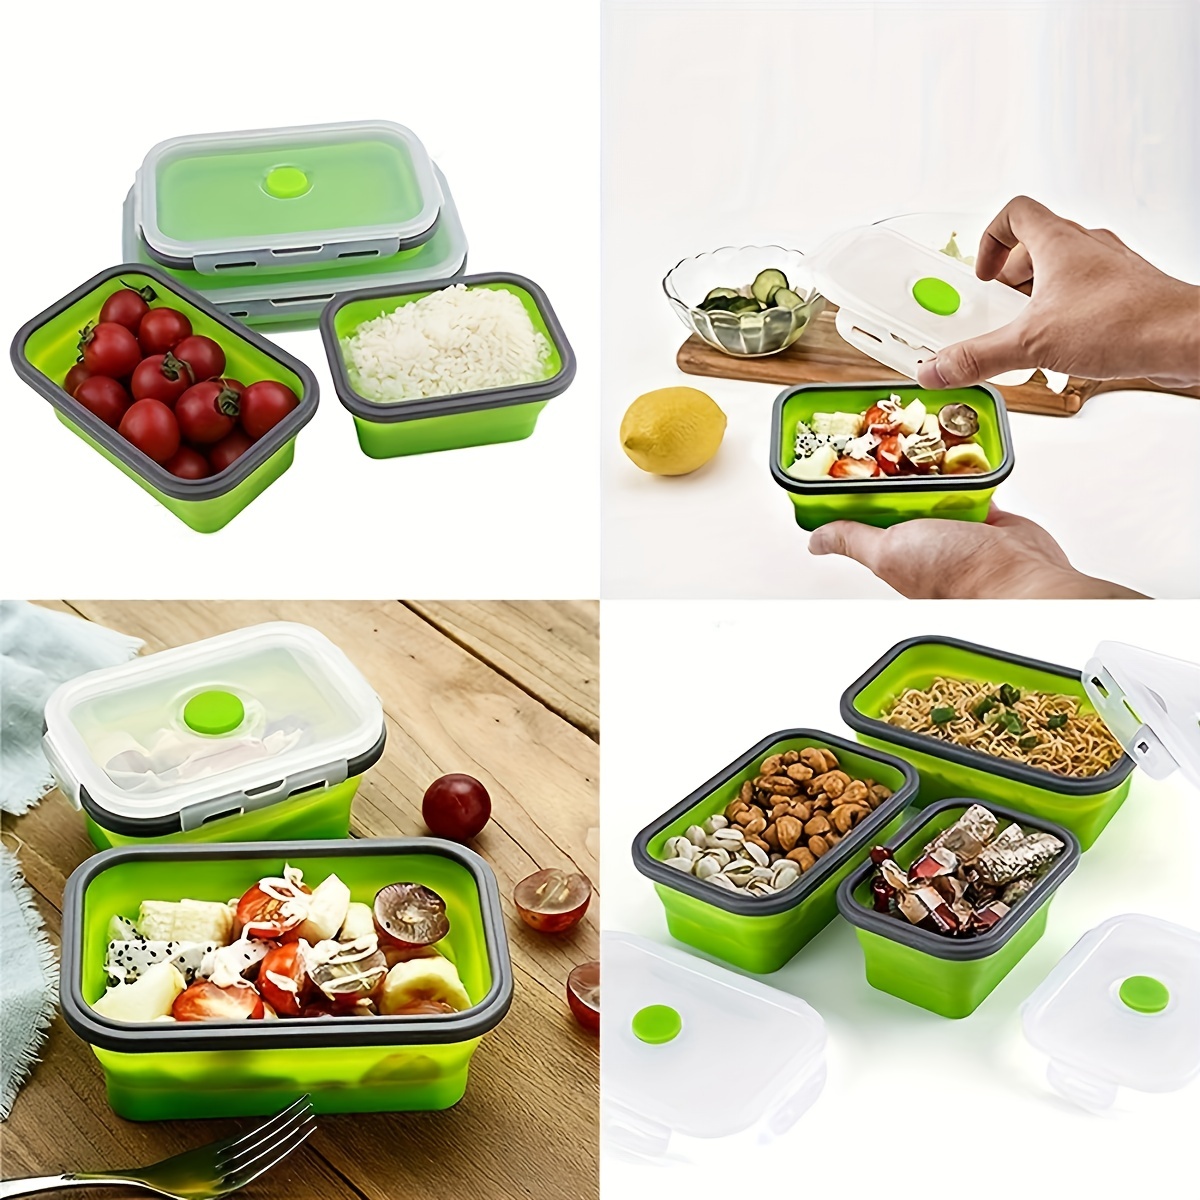 Fsqjgq Reusable Bags Silicone Big Waterproof Lunch Box with Compartment Lunch Box Microwave Sealed Kids School Lunch Plate Kitchen Food Storage